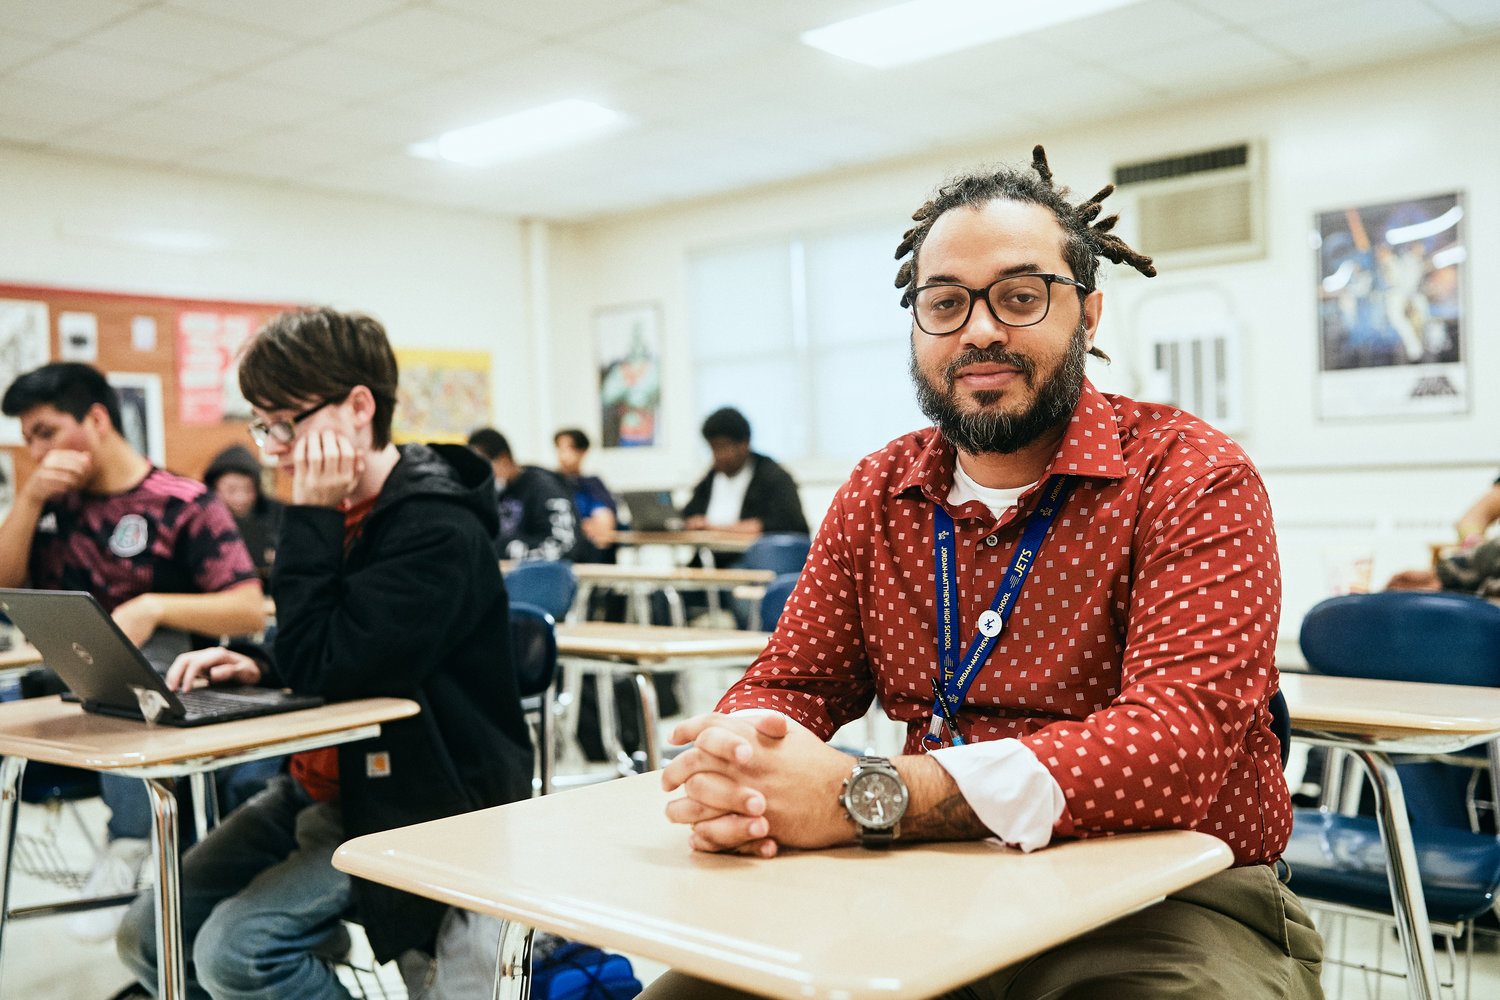 Travis Patterson, CIS employee, poses for a portrait at Jordan-Matthews High School in Siler City. He supervises after-school homework help sessions. 'It opens the doors for us to have very real conversations,' he said.